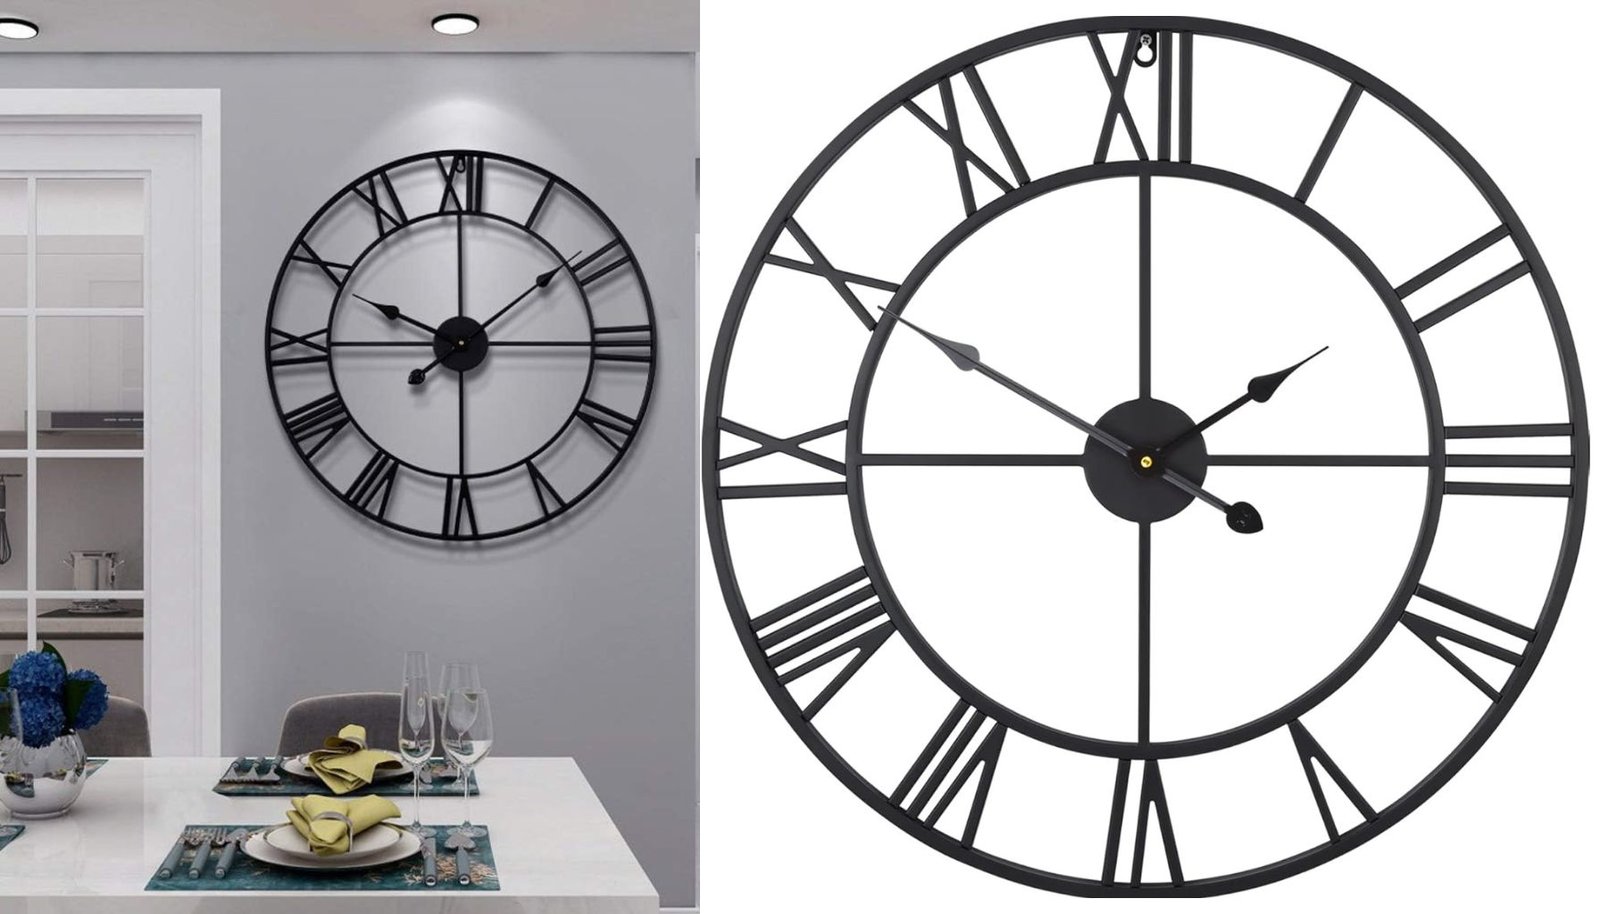 LEIKE Store Living Room Wall Clock review